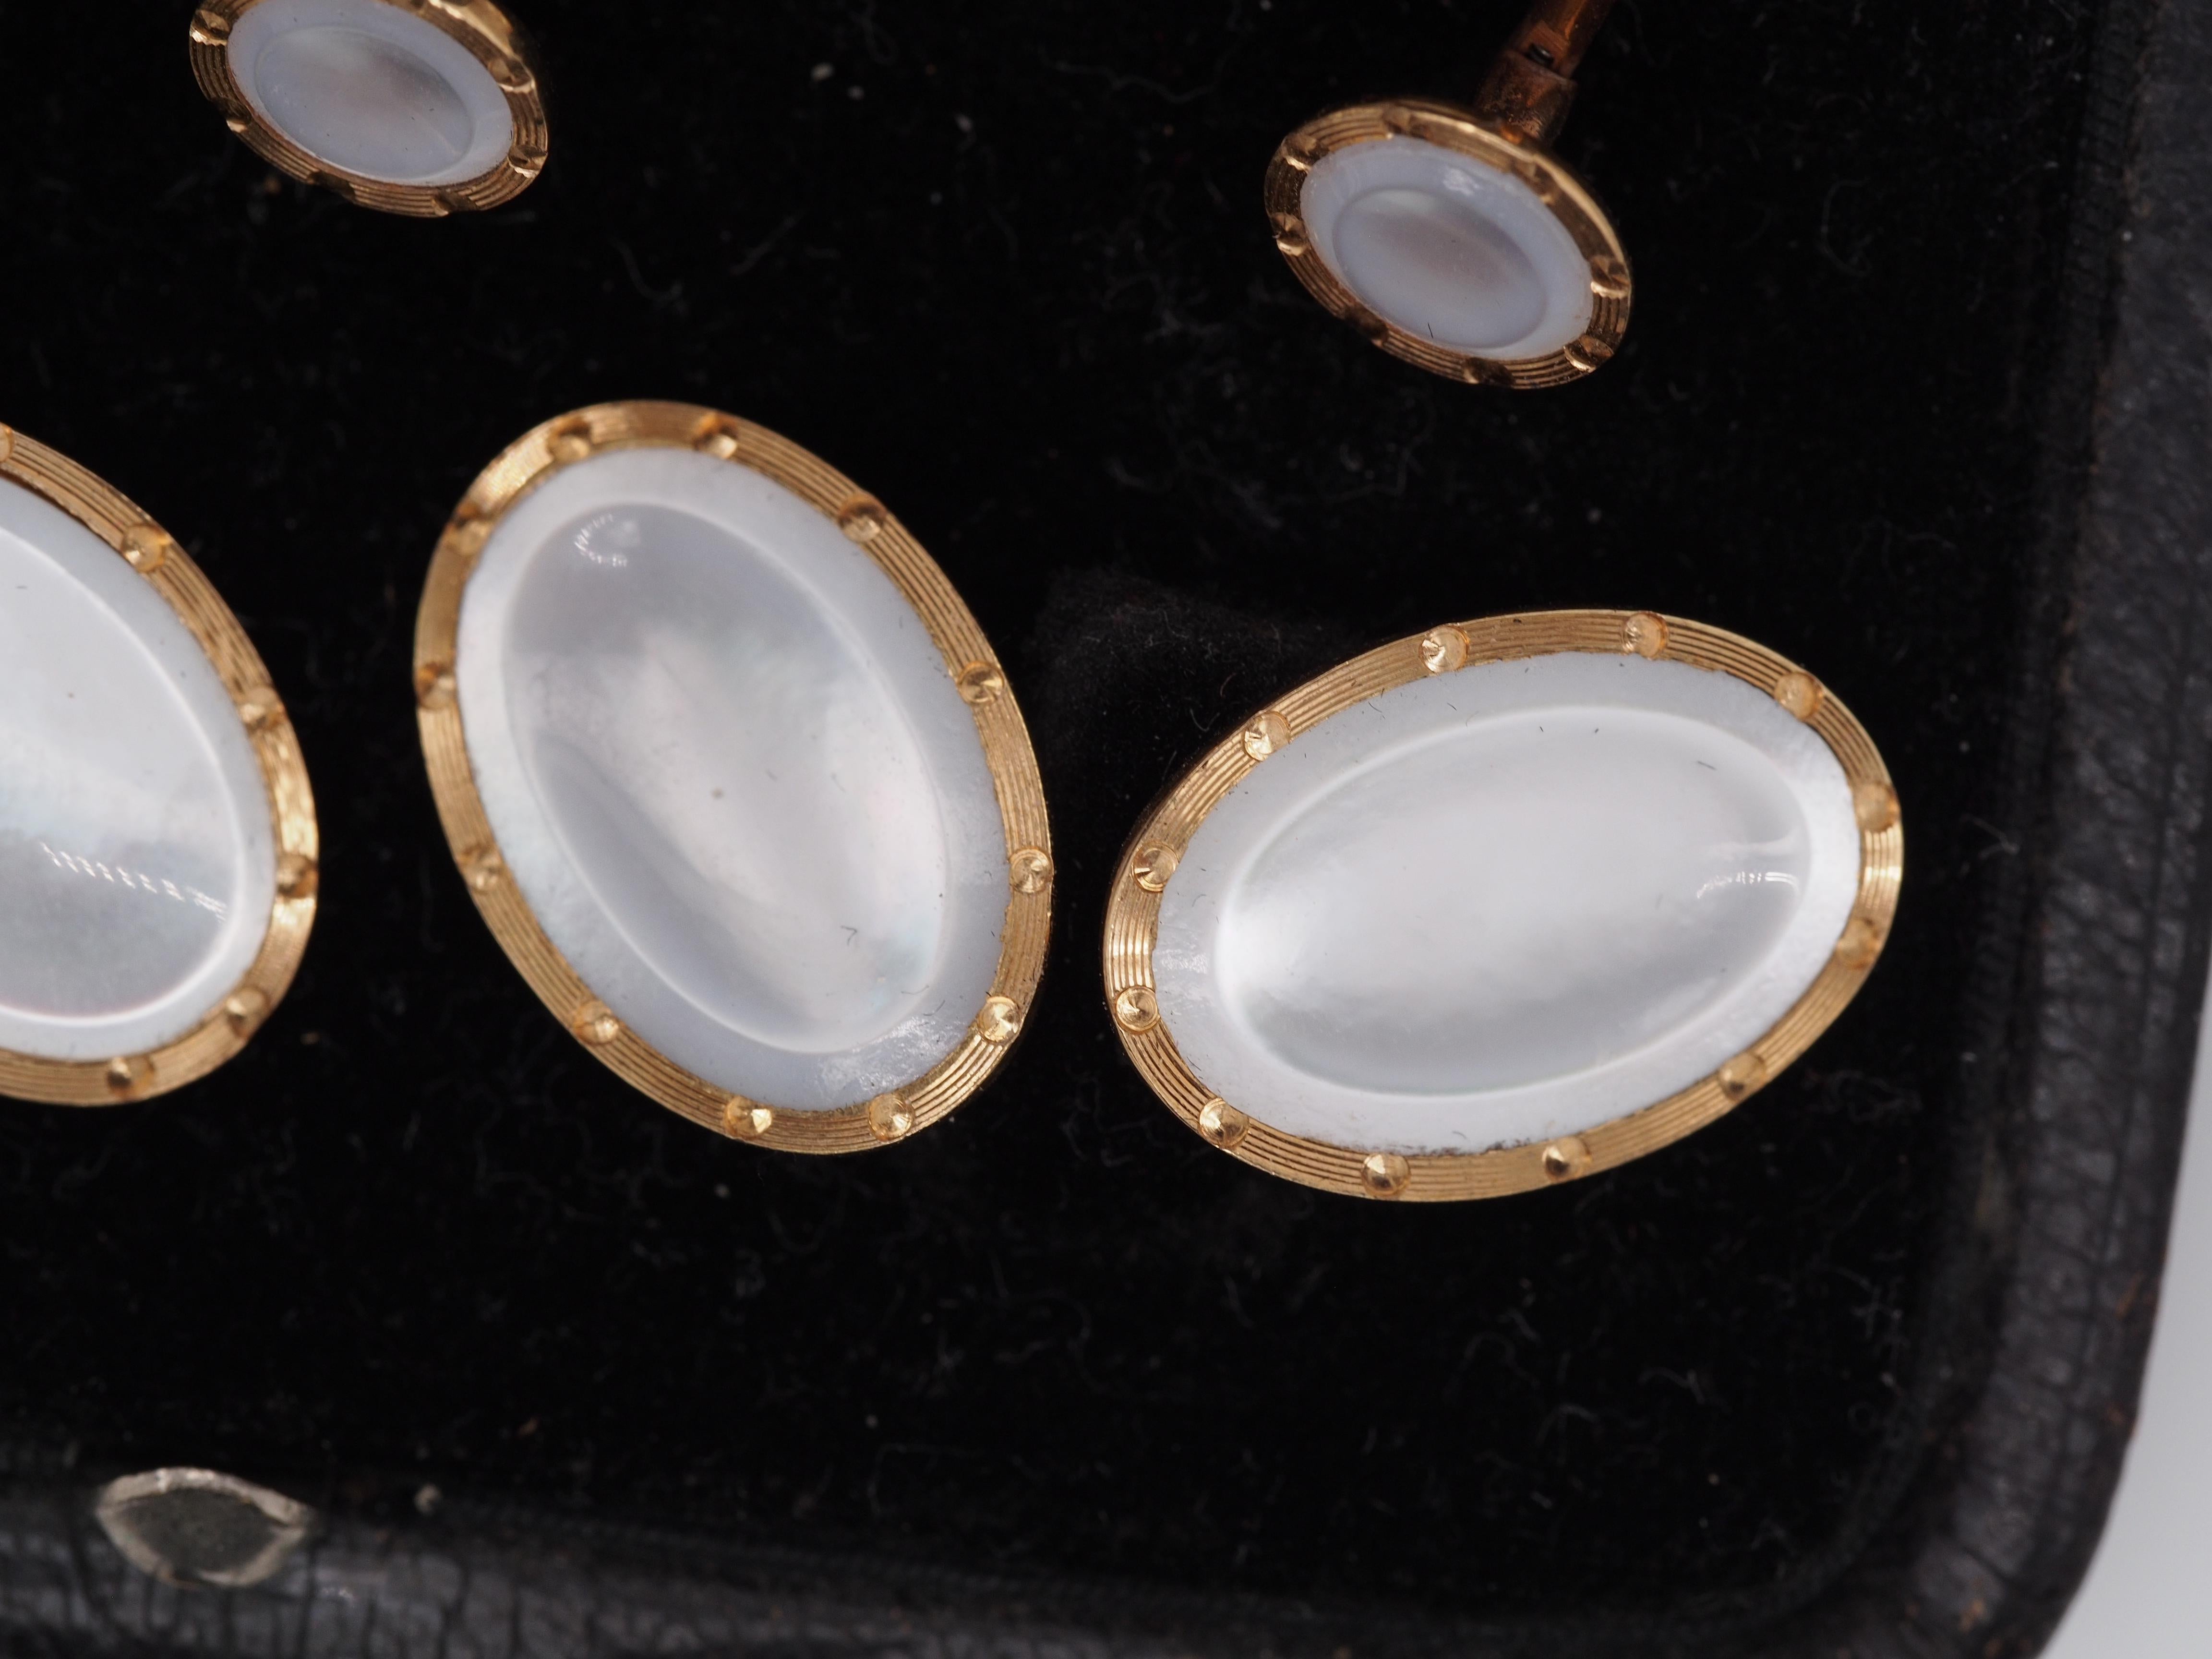 Circa 1920s 14K Yellow Gold Mother of Pearl Cufflink and Tuxedo Set In Good Condition For Sale In Atlanta, GA